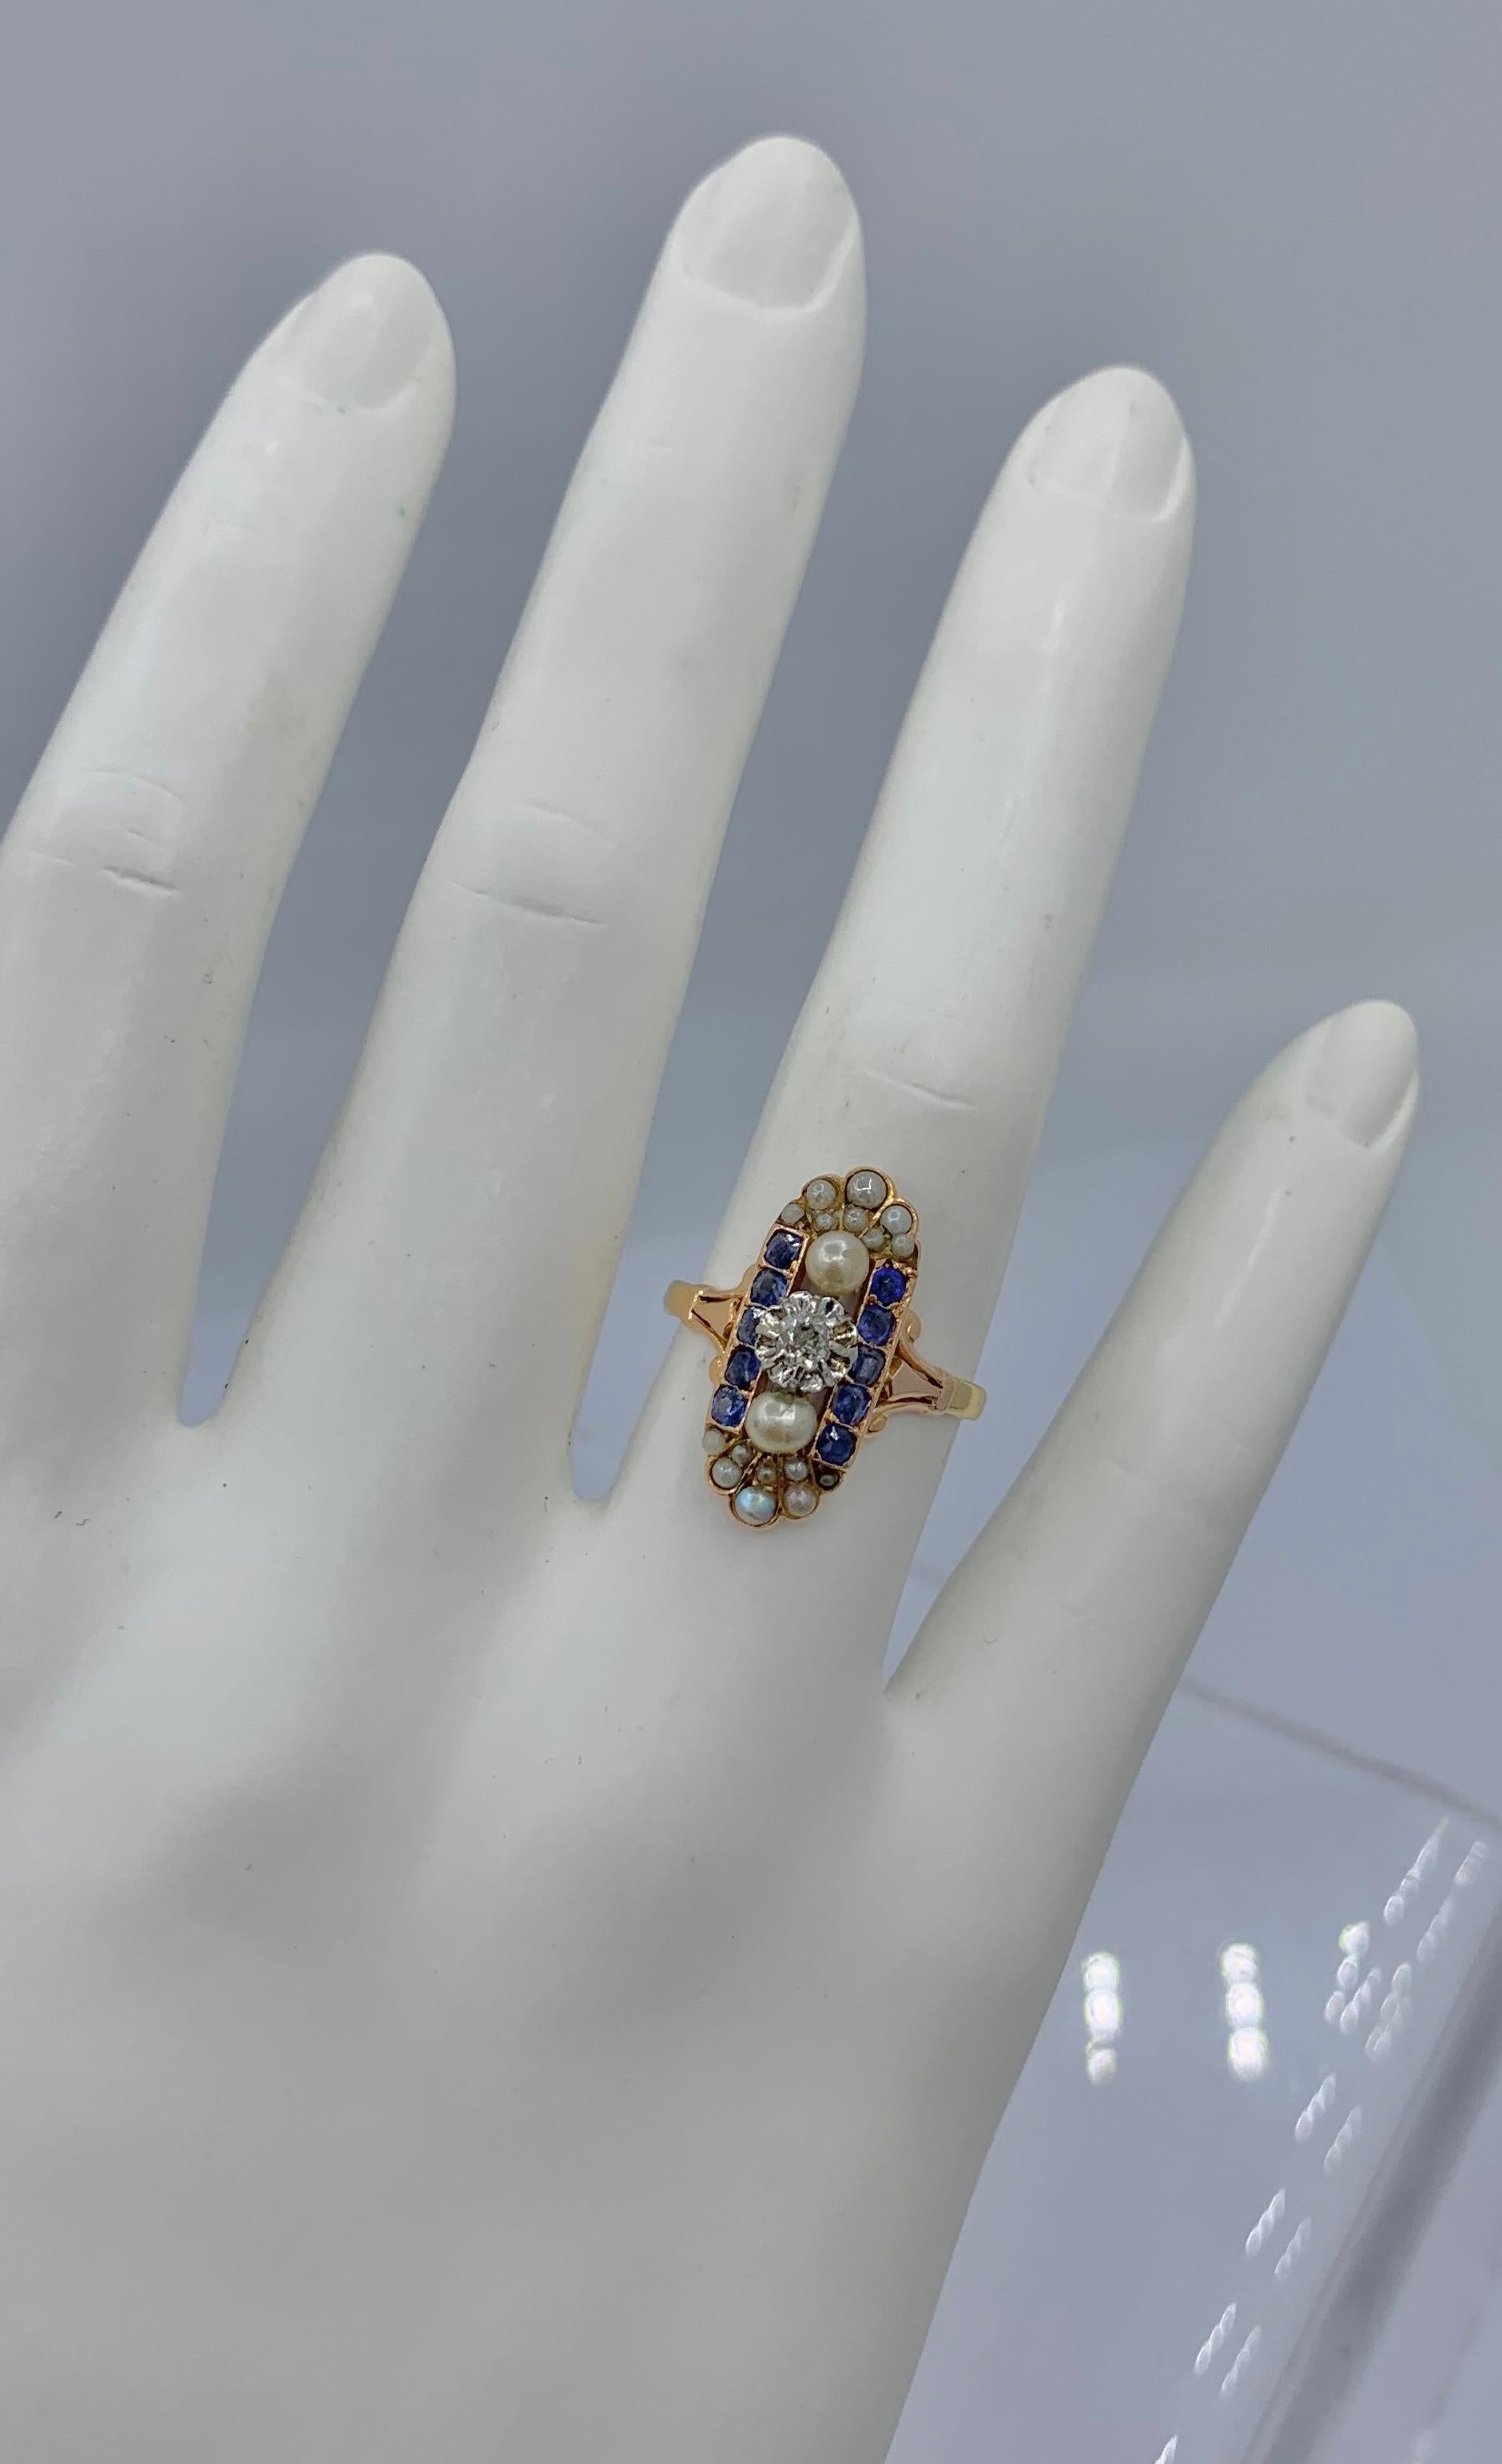 This is an absolutely stunning Old Mine Cut Diamond, Natural Sapphire and Pearl, Platinum and Gold Antique Art Deco - Victorian Wedding Engagement Ring.  The oval panel design in Platinum is gorgeous.   In the center of the ring is a sparkling Old